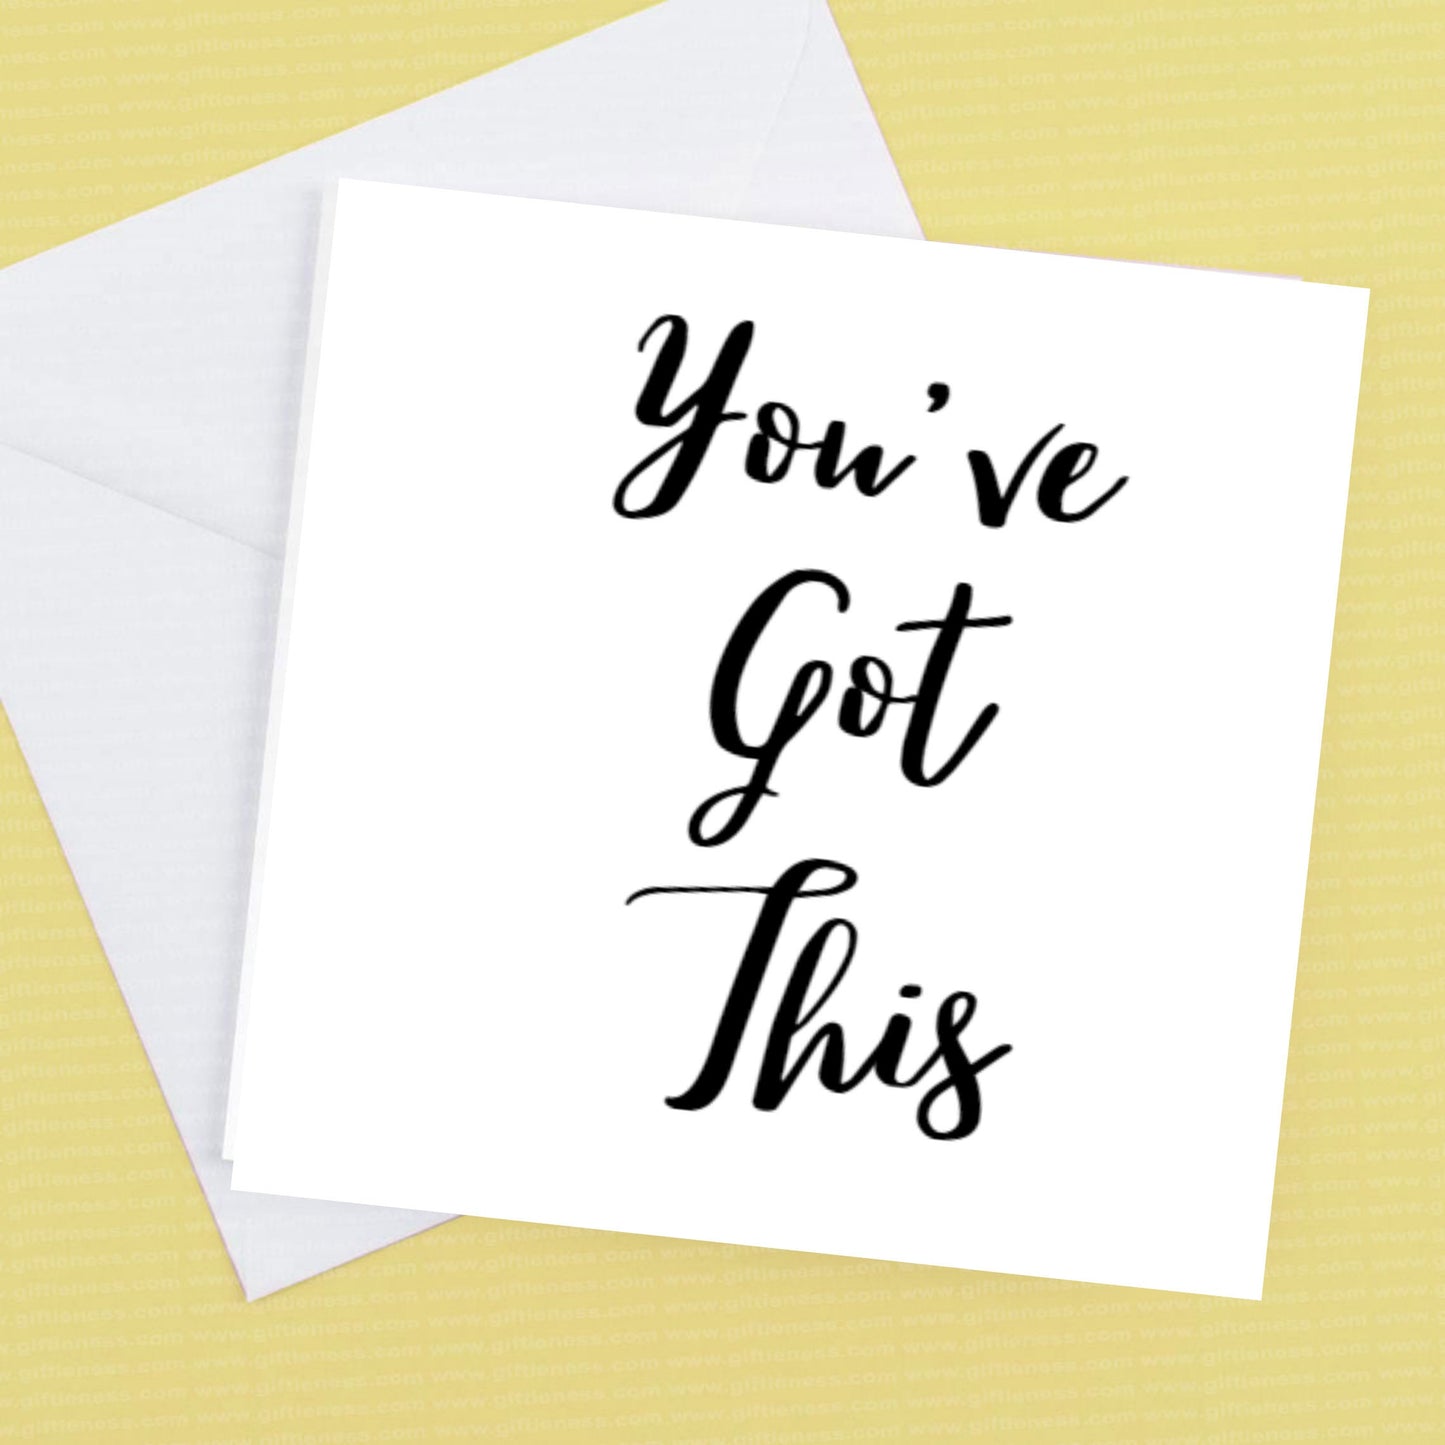 You've got this  - Positivity - card and envelope